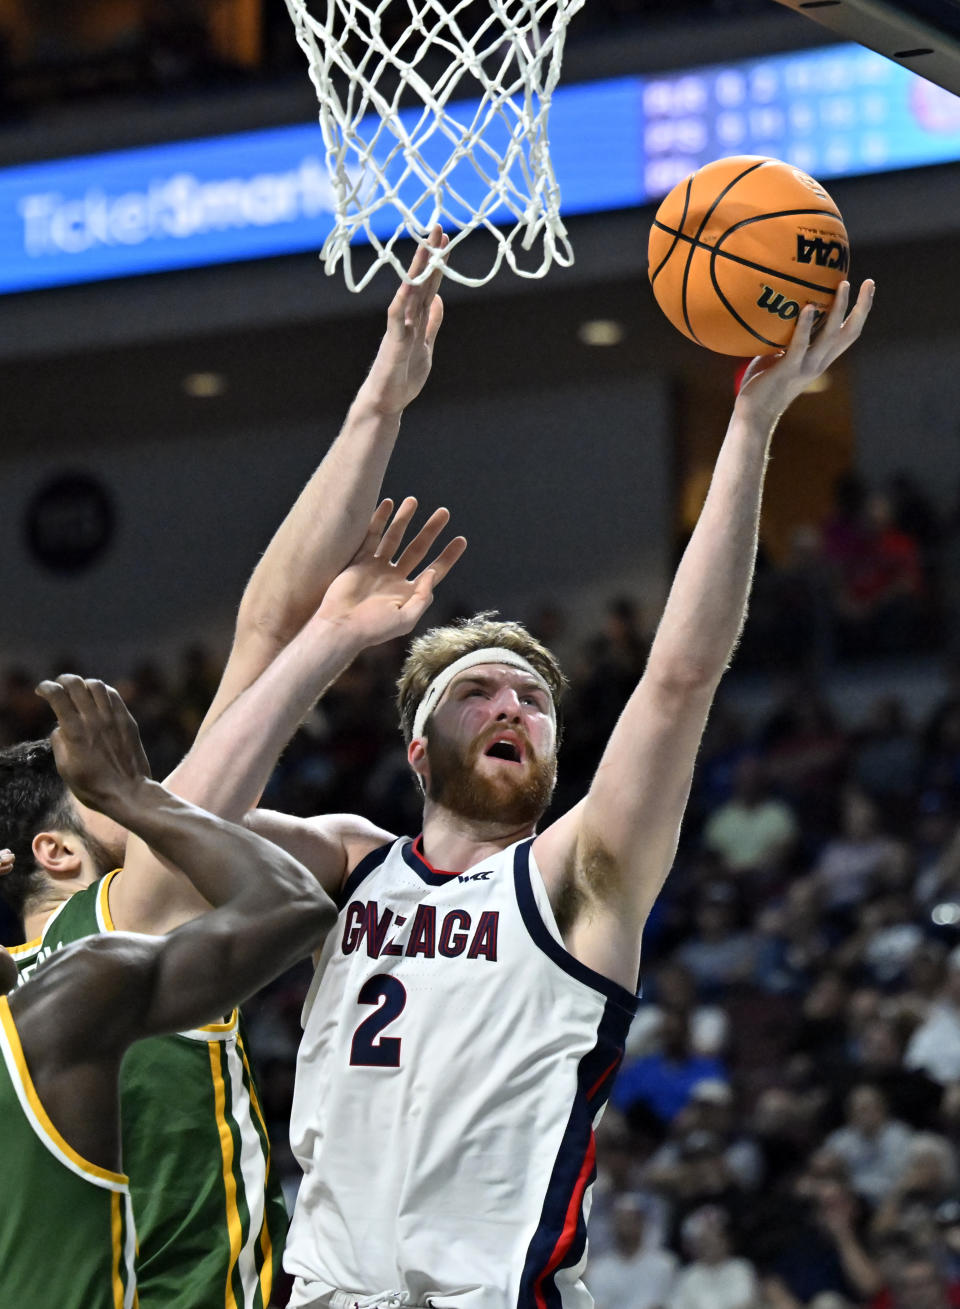 Gonzaga forward Drew Timme (2) shoots against San Francisco during the second half of an NCAA college basketball game in the semifinals of the West Coast Conference men's tournament Monday, March 6, 2023, in Las Vegas. (AP Photo/David Becker)